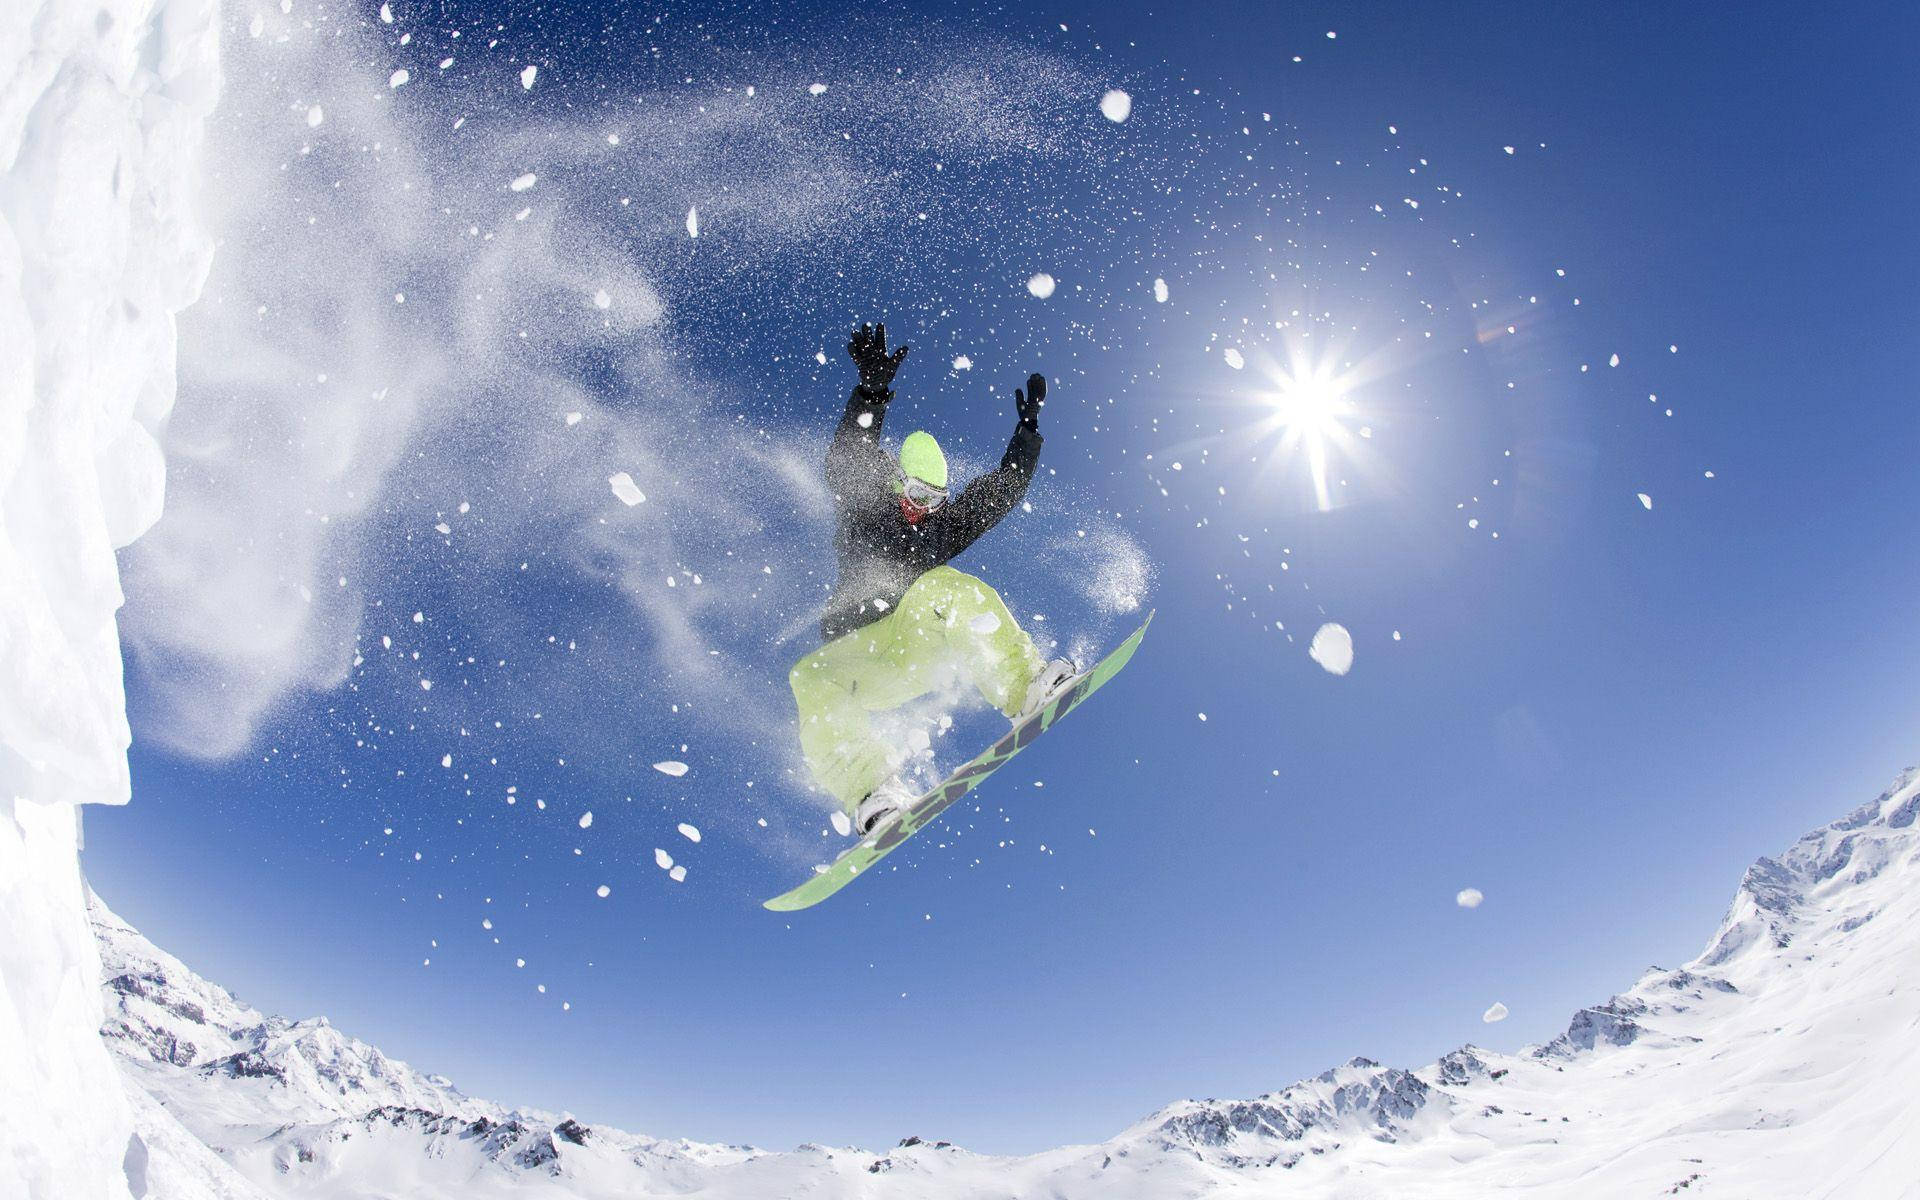 Man With Snowboard Posing Mid-trick Background